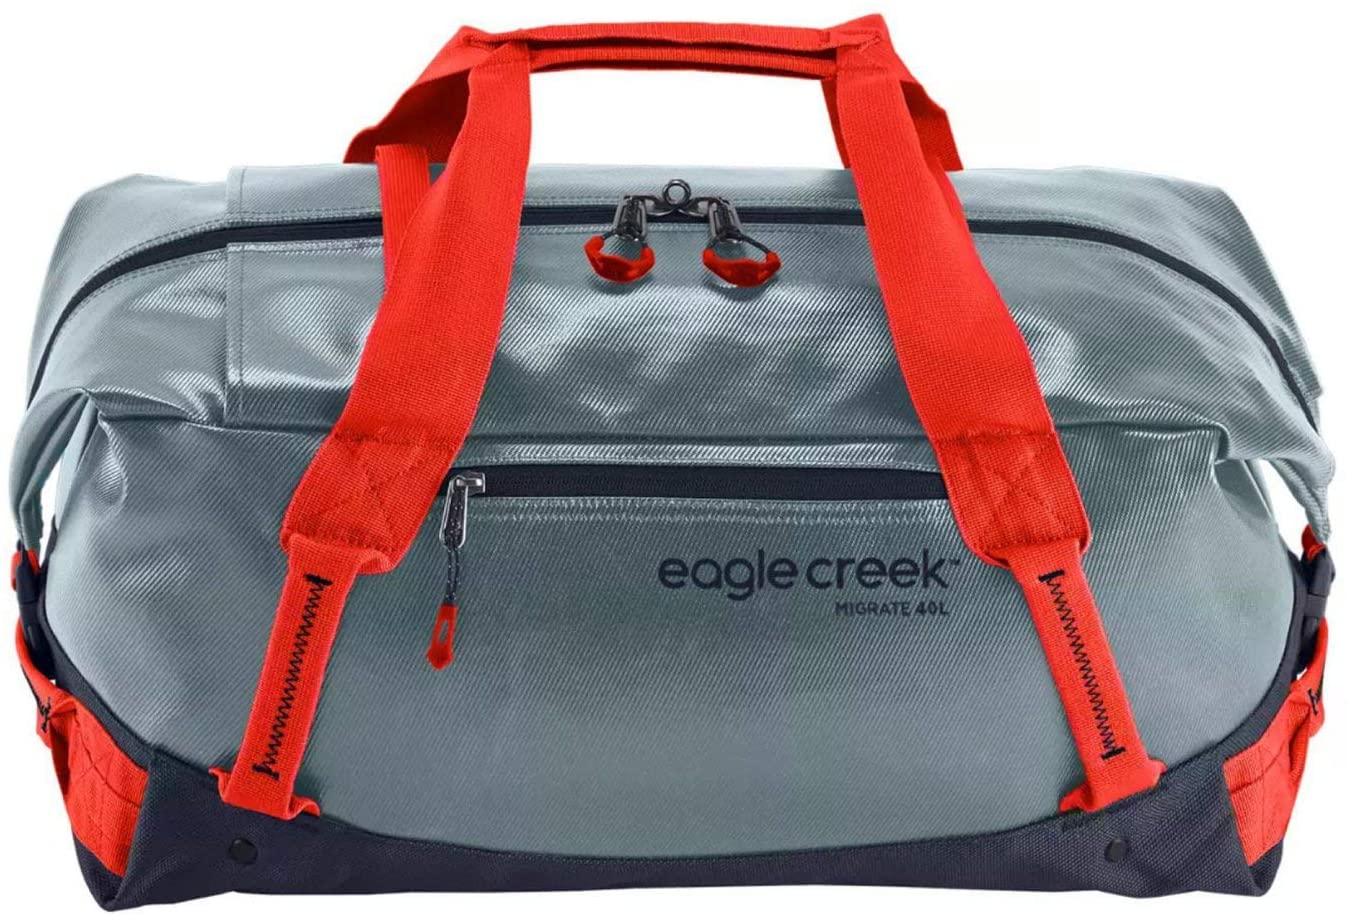 Eagle Creek Migrate Duffel 40L in Biwa Lake Blue color from the front